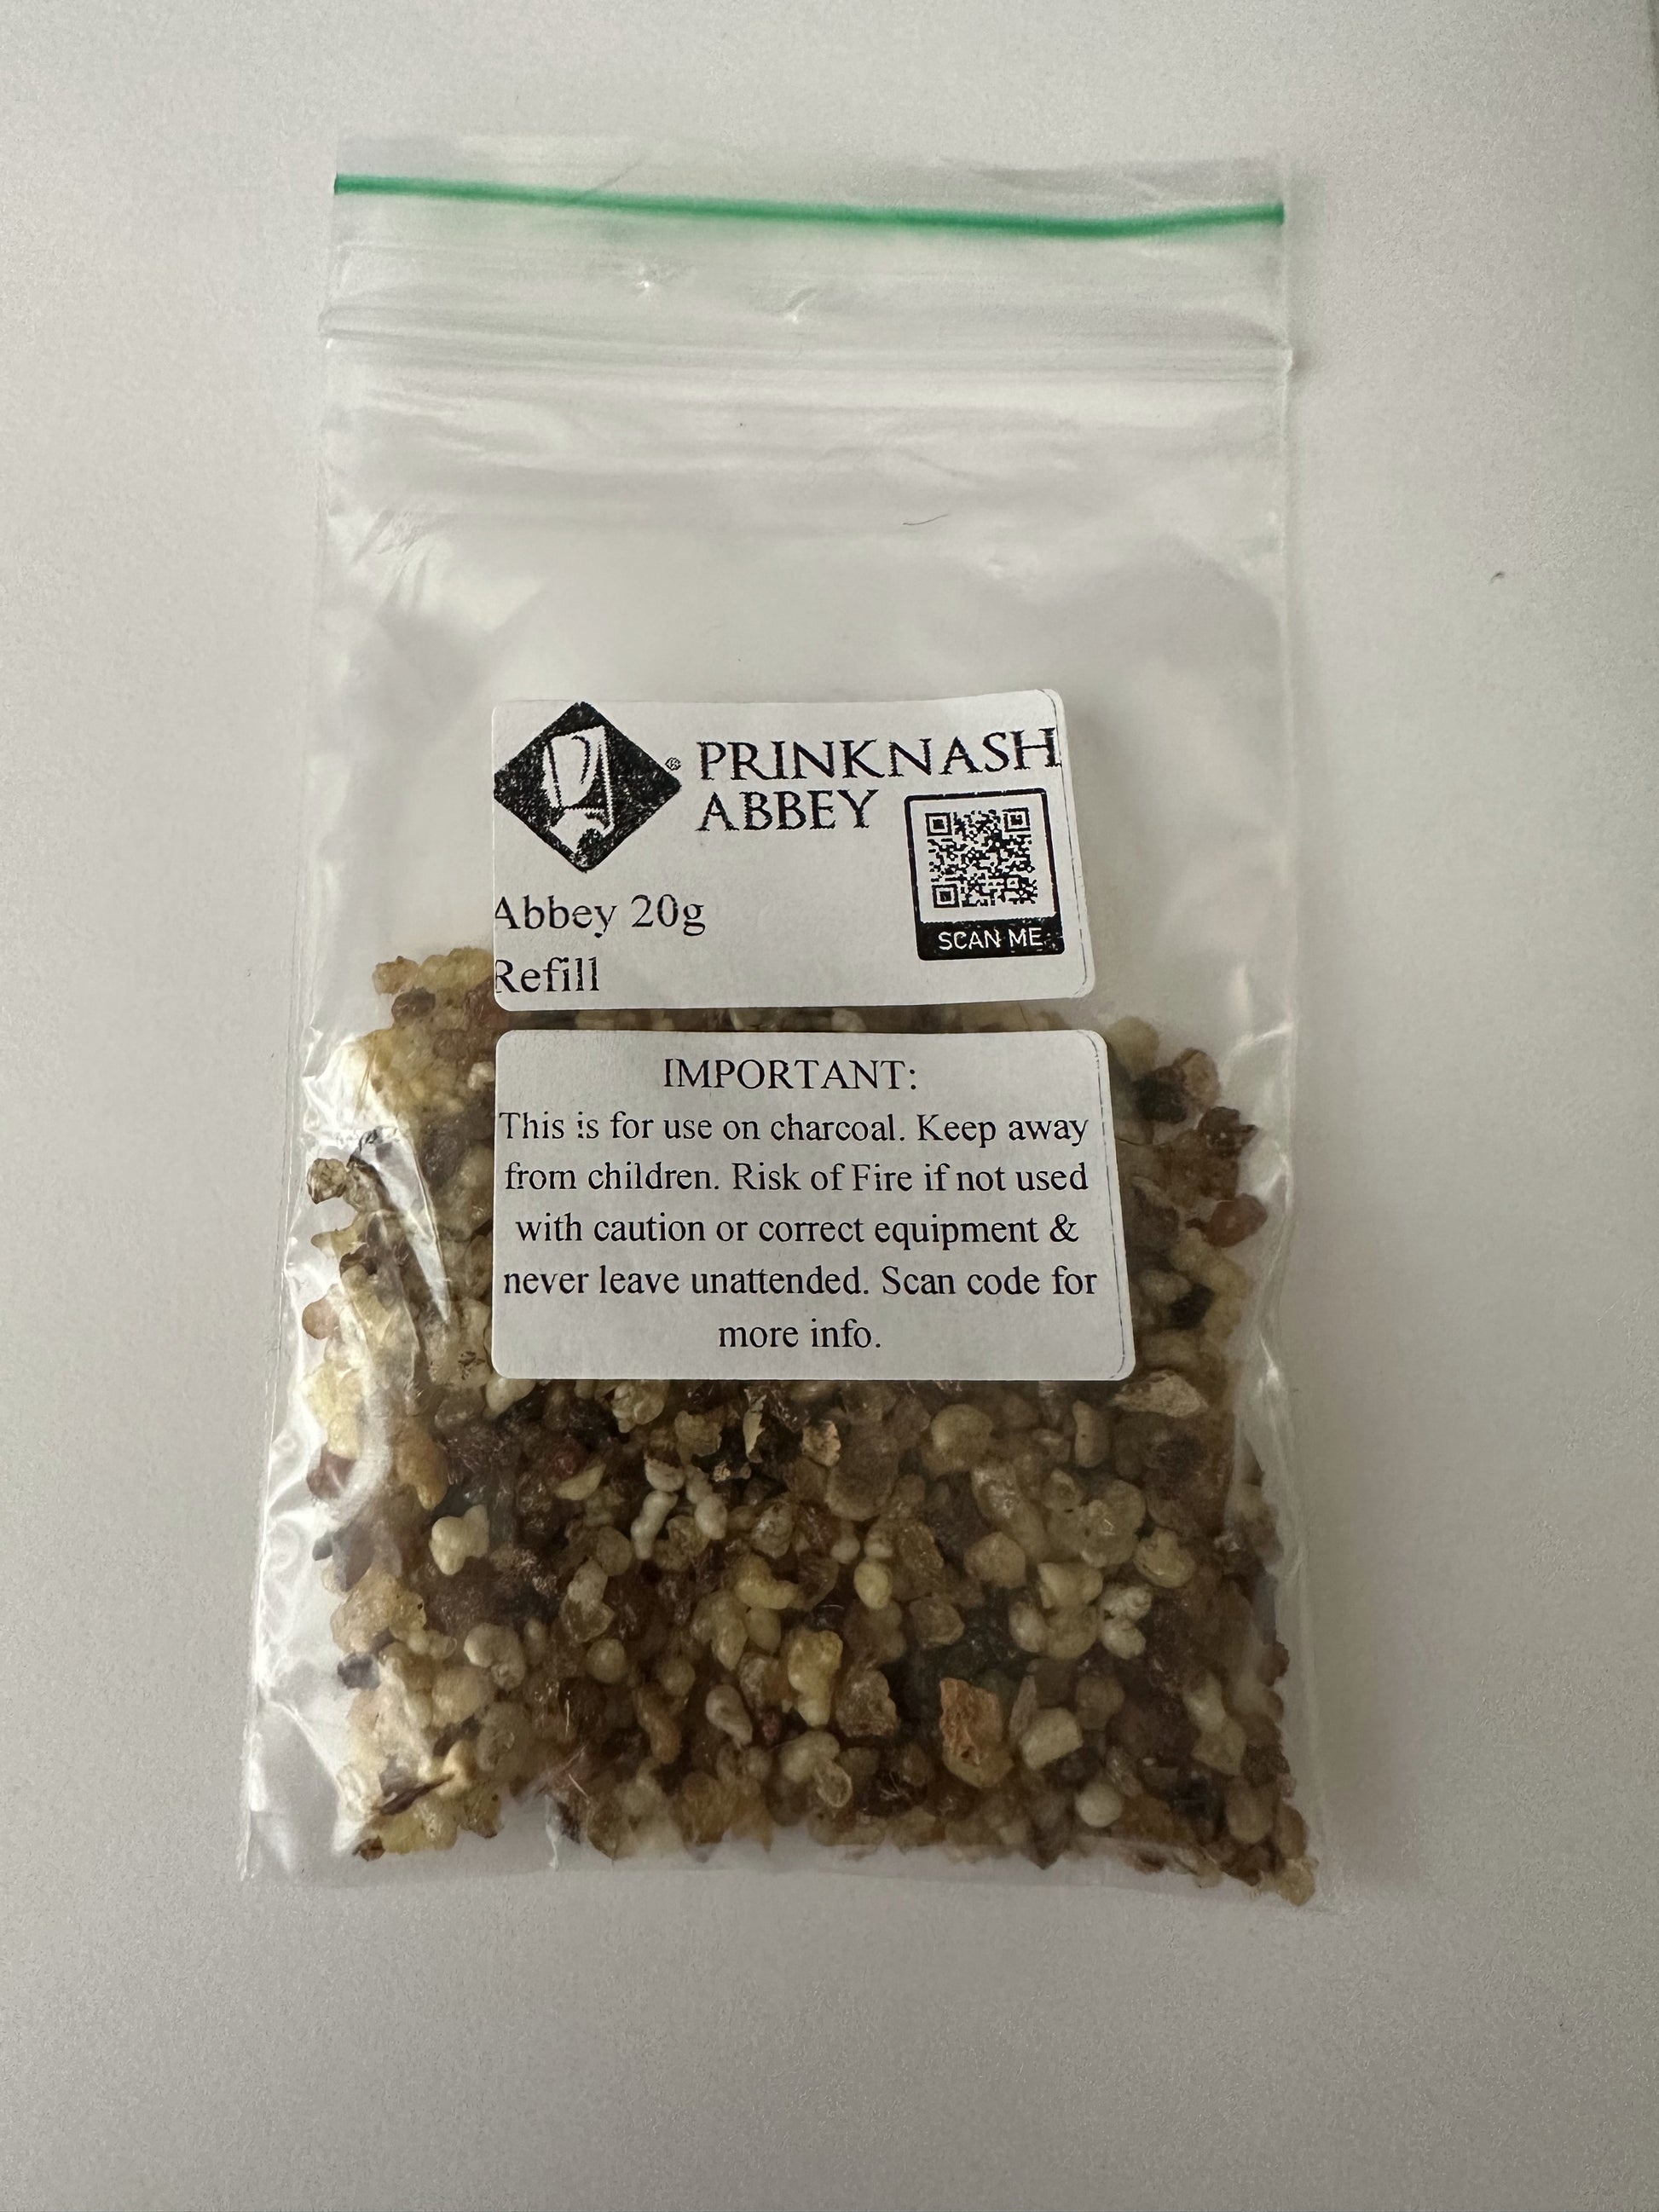 Genuine Prinknash Abbey Incense Trial & Refill bags - Abbey 20g, 50g, 100g, 250g - CritchCorp Retail & Wholesale